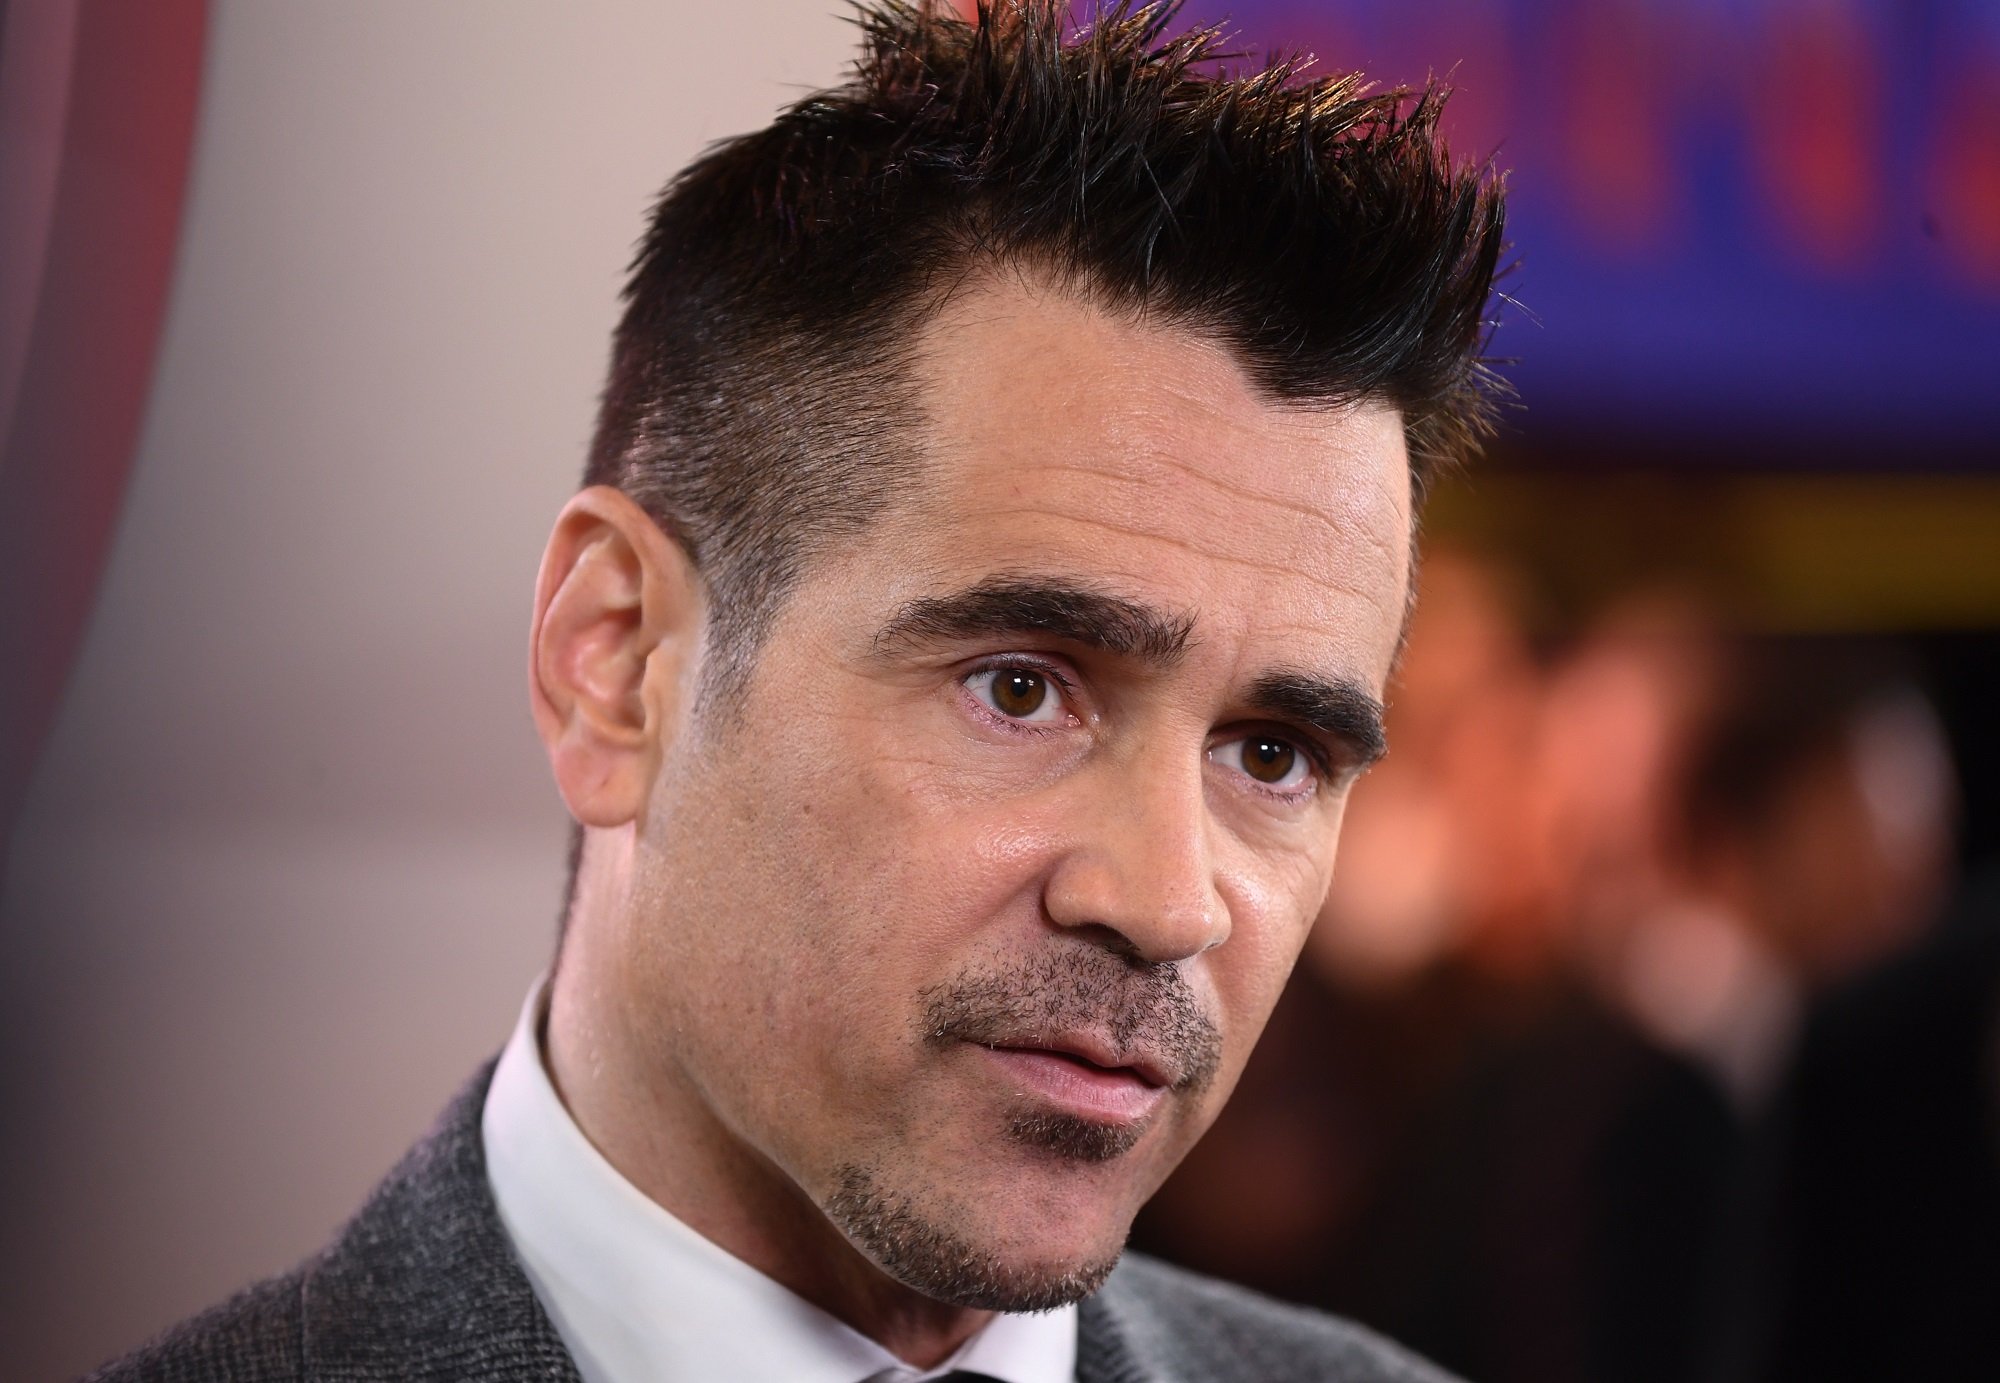 Who Did Colin Farrell Play in ‘Fantastic Beasts and Where To Find Them’? Why Some Are Calling for Him To Rejoin the Franchise